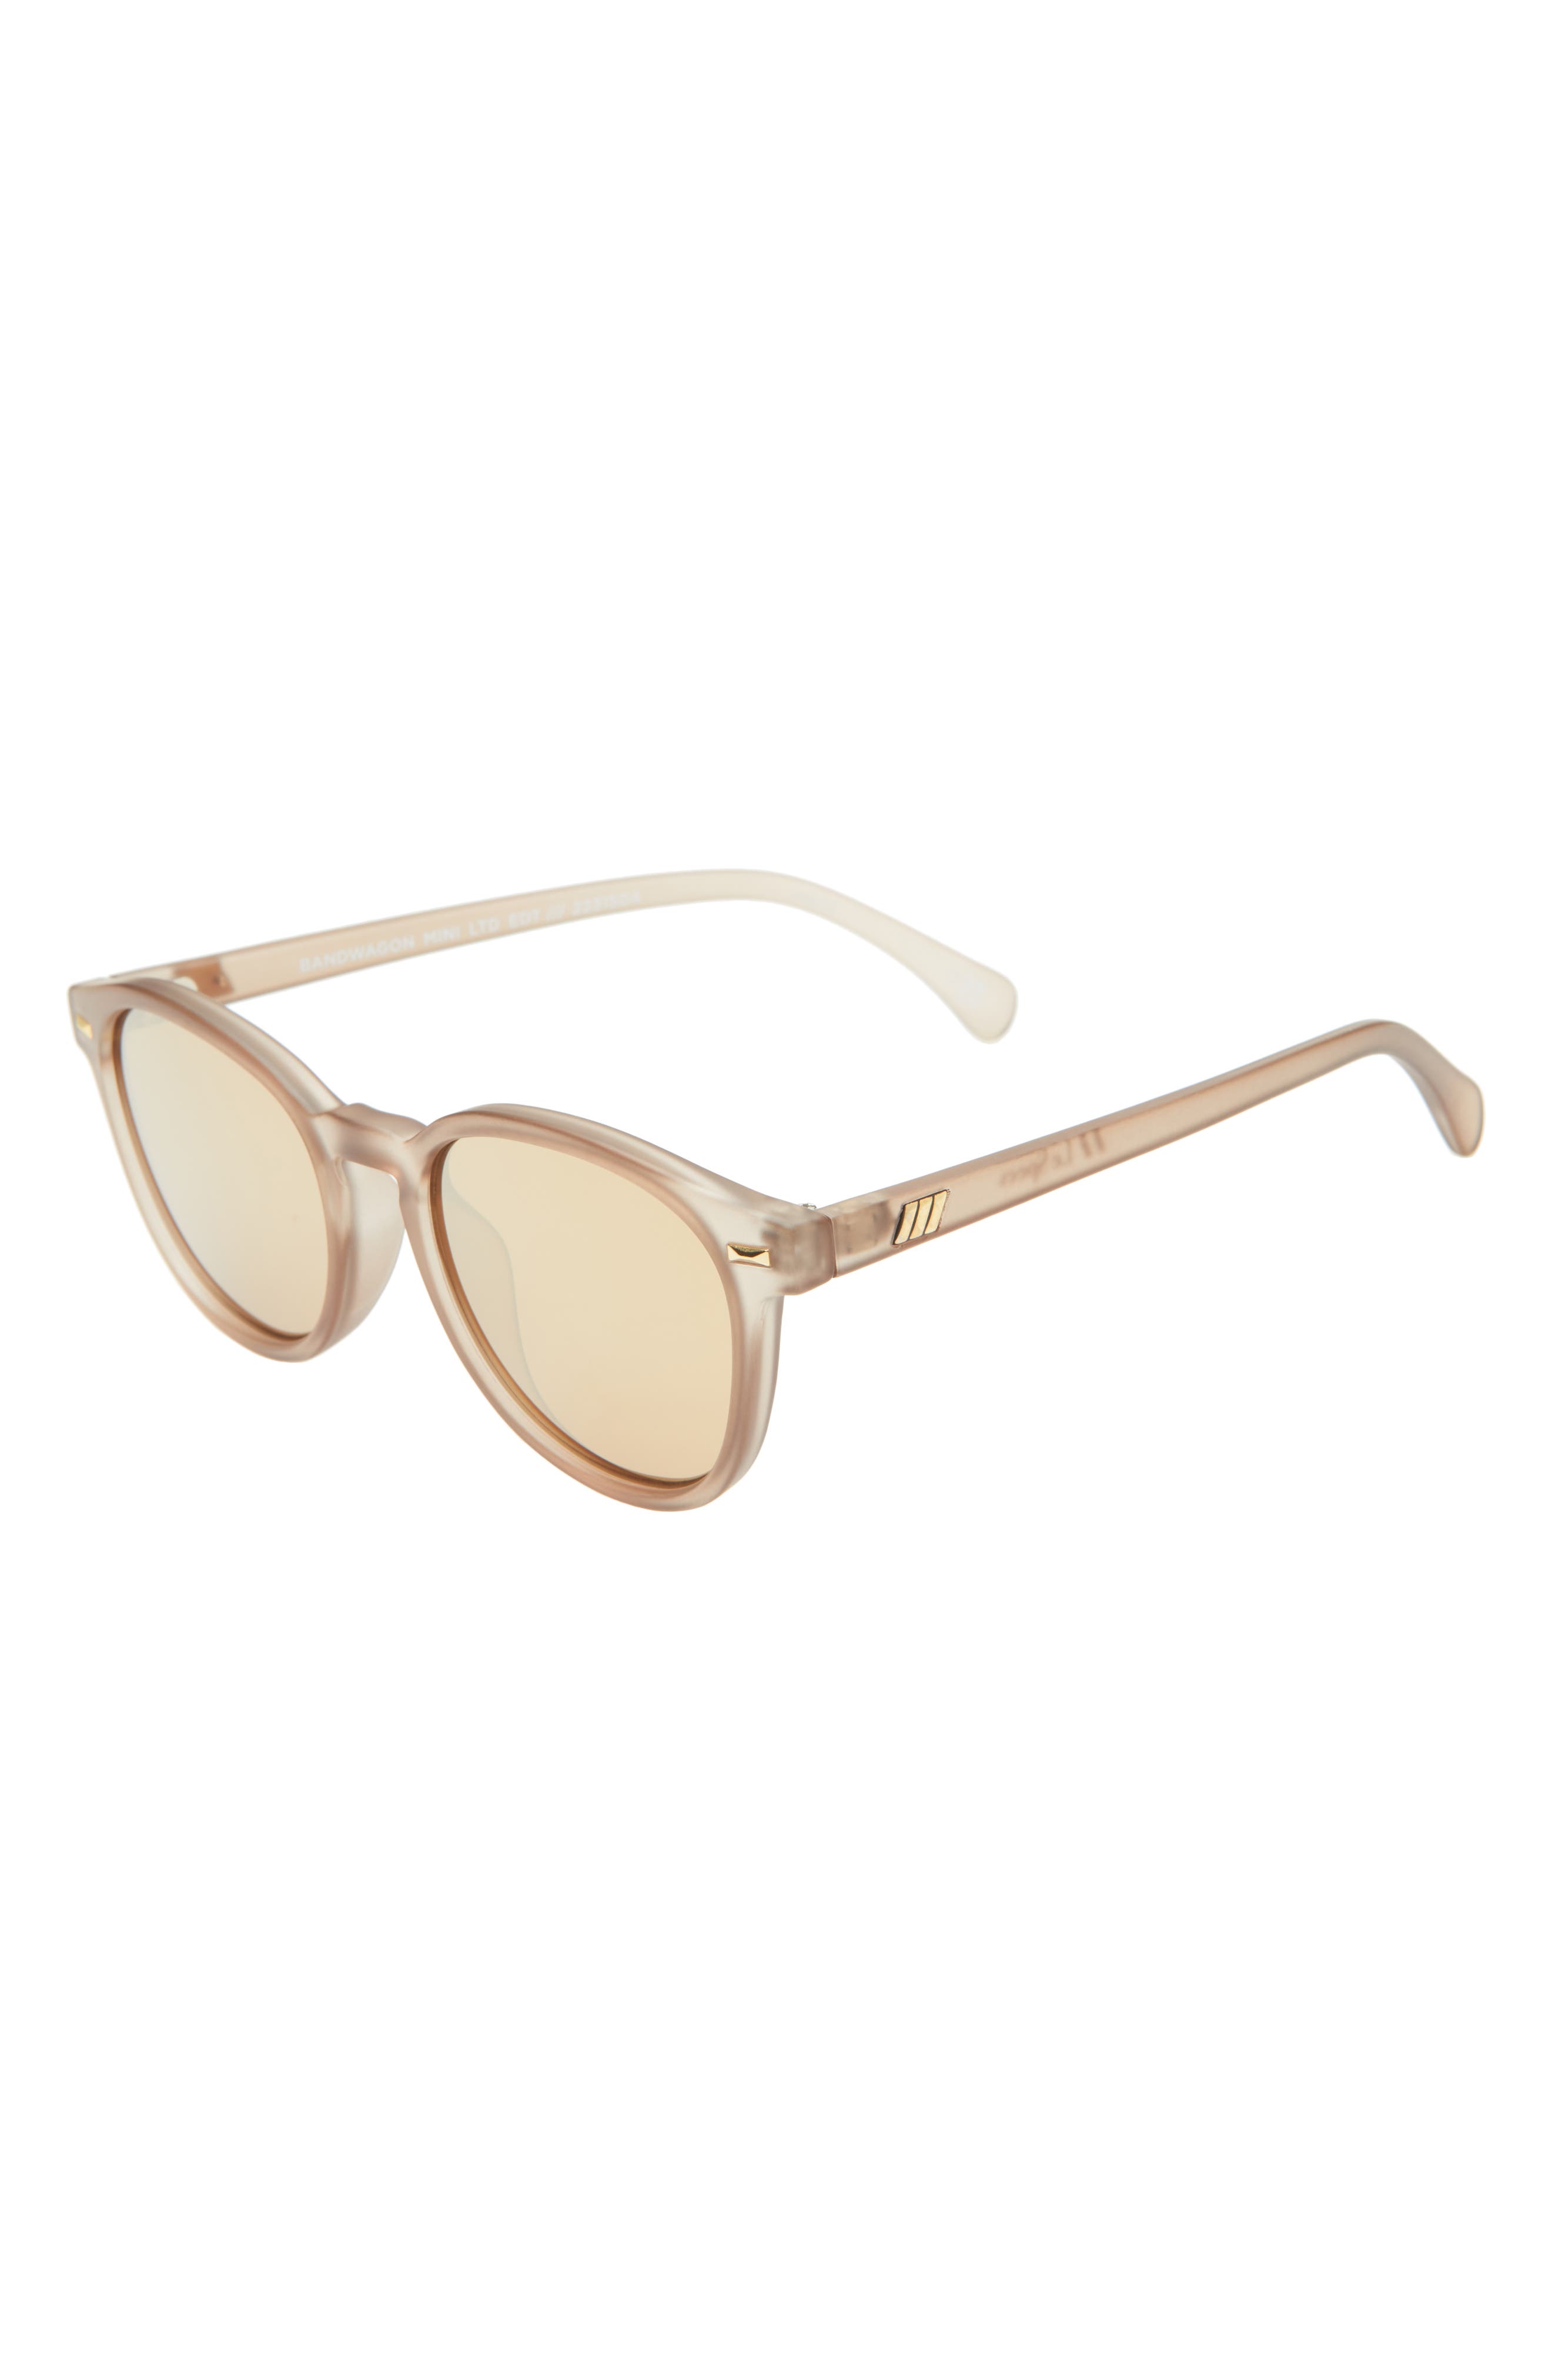 Le Specs Bandwagon 45mm Round Sunglasses in Matte Stone at Nordstrom